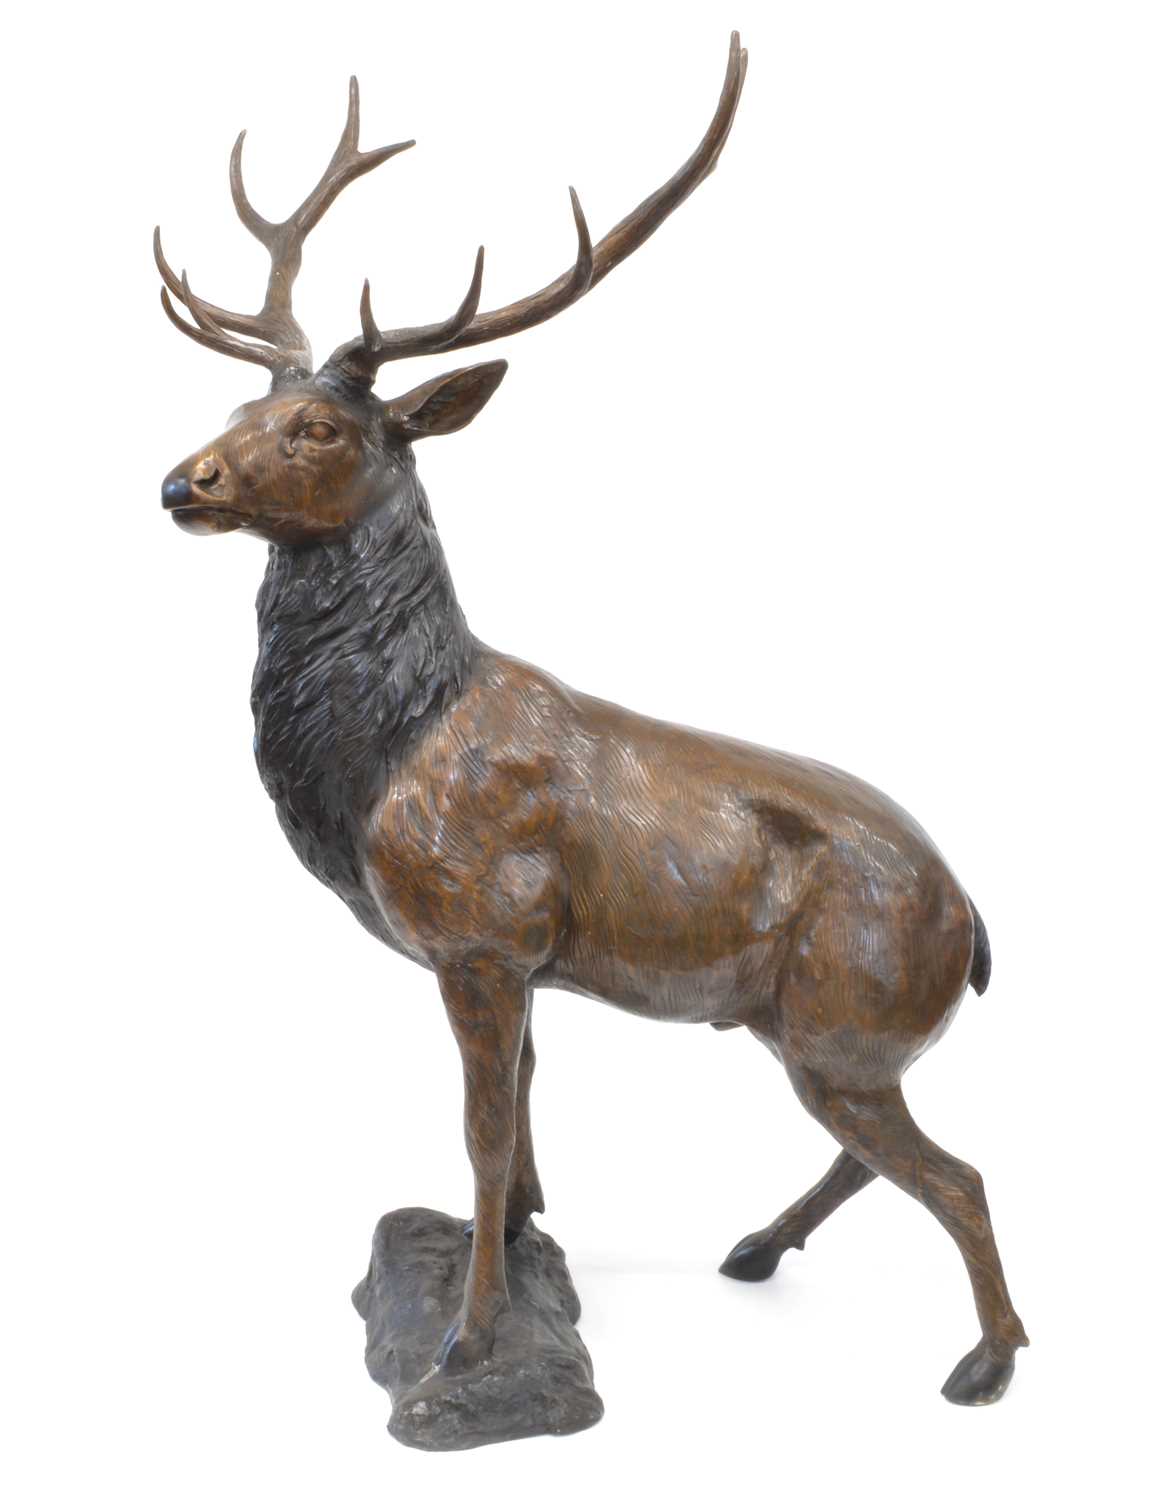 451 - Large and Impressive Near Life-Size Bronze Stag